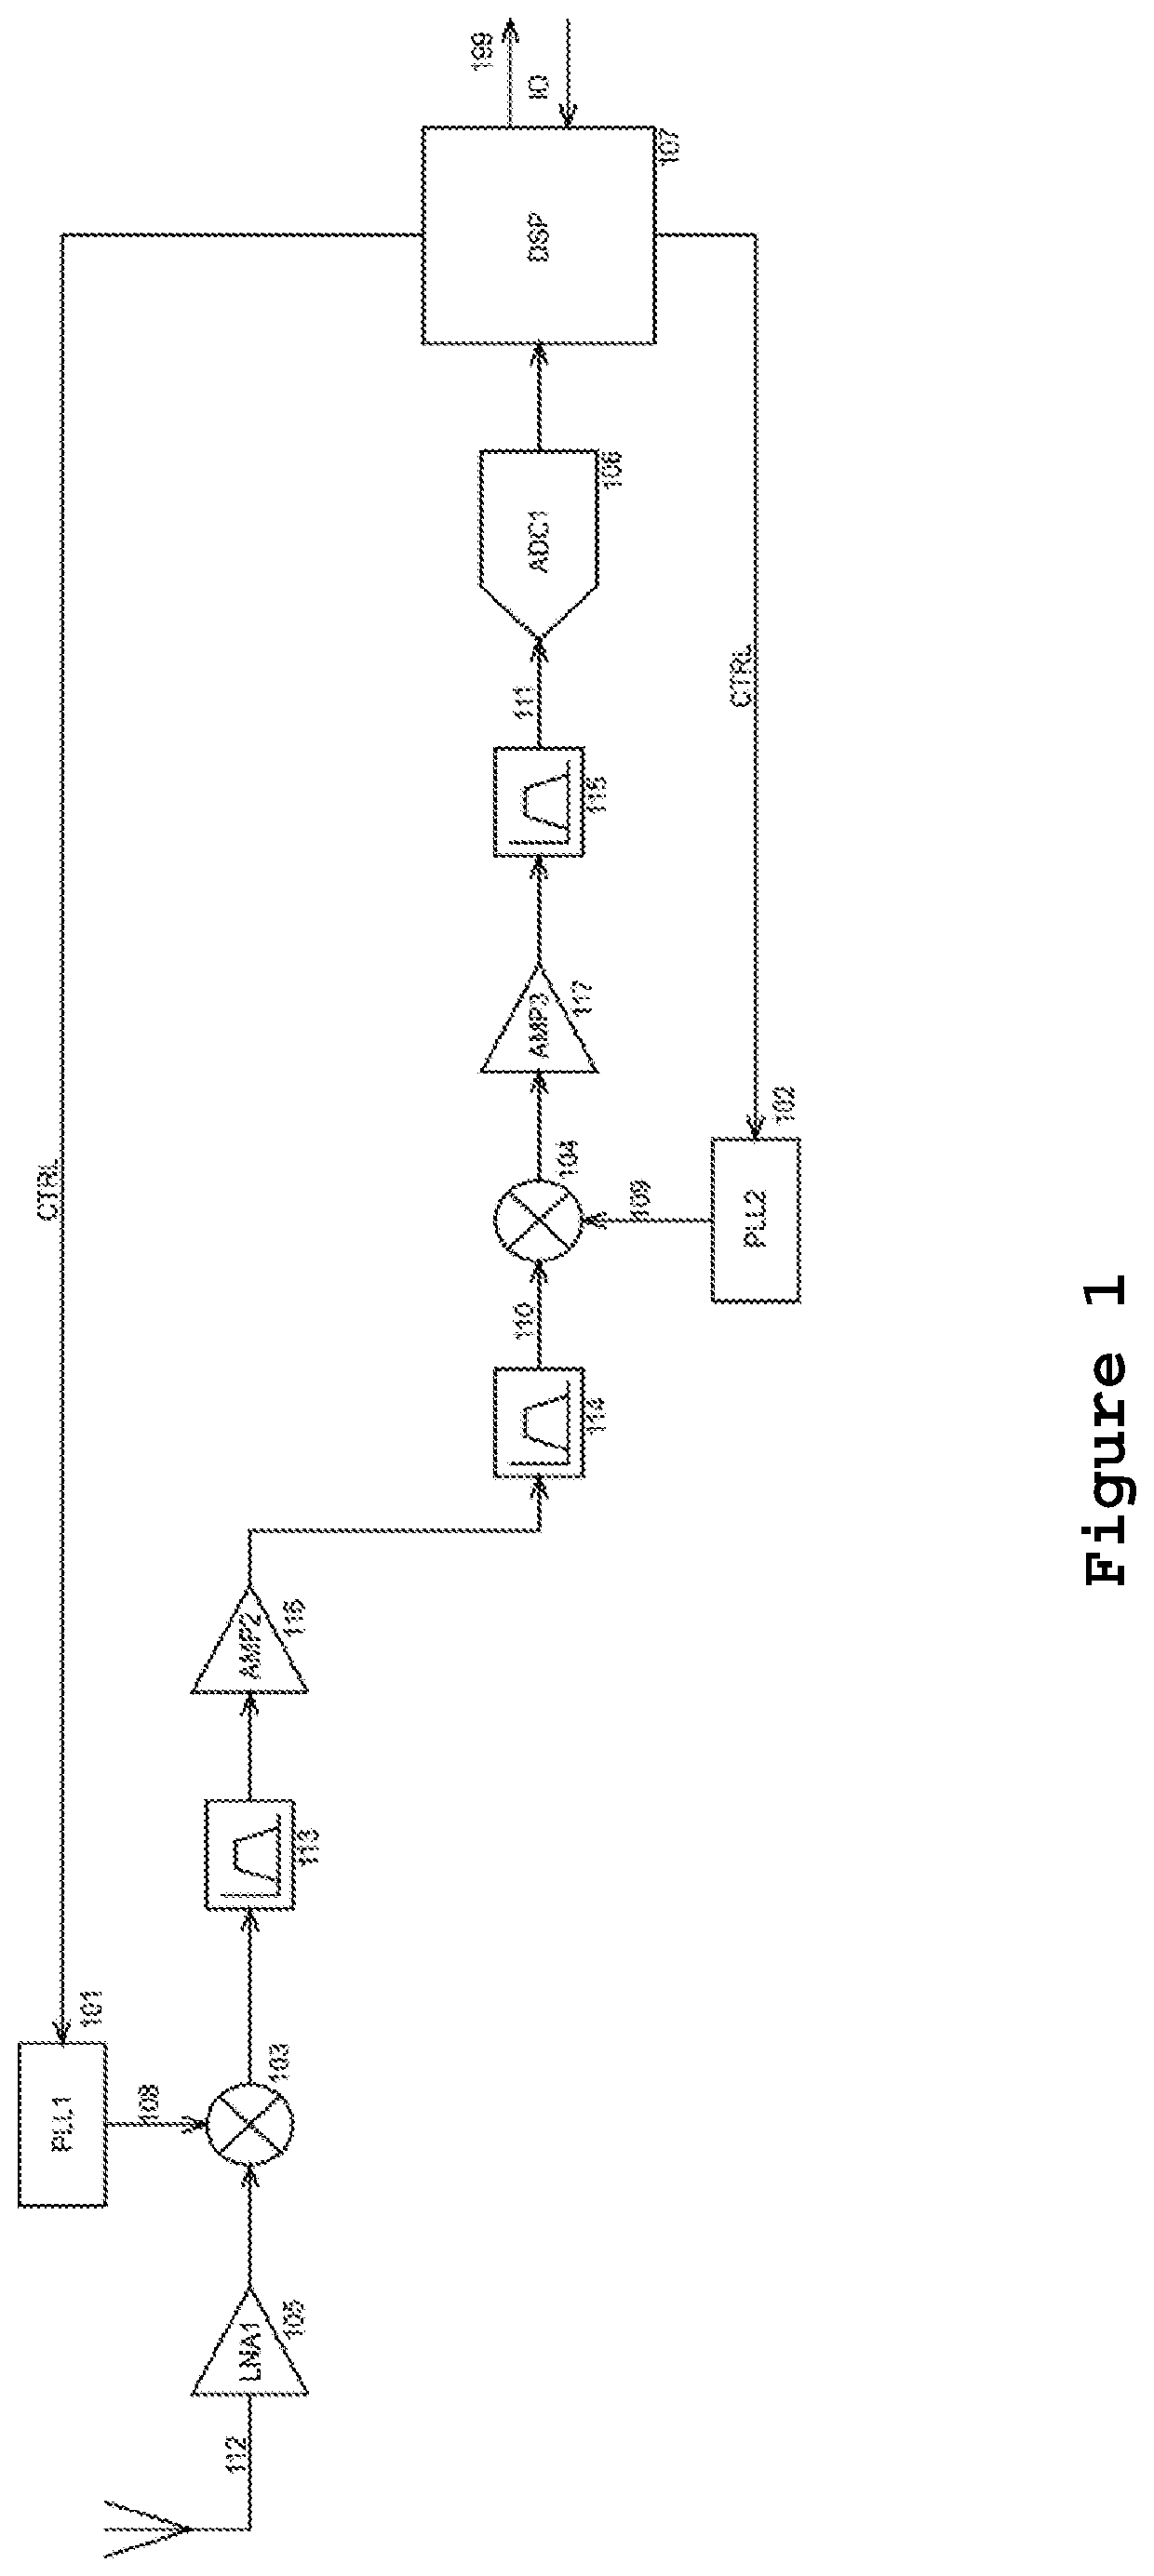 Method for suppresing noise and increasing speed in miniaturized radio frequency signal detectors